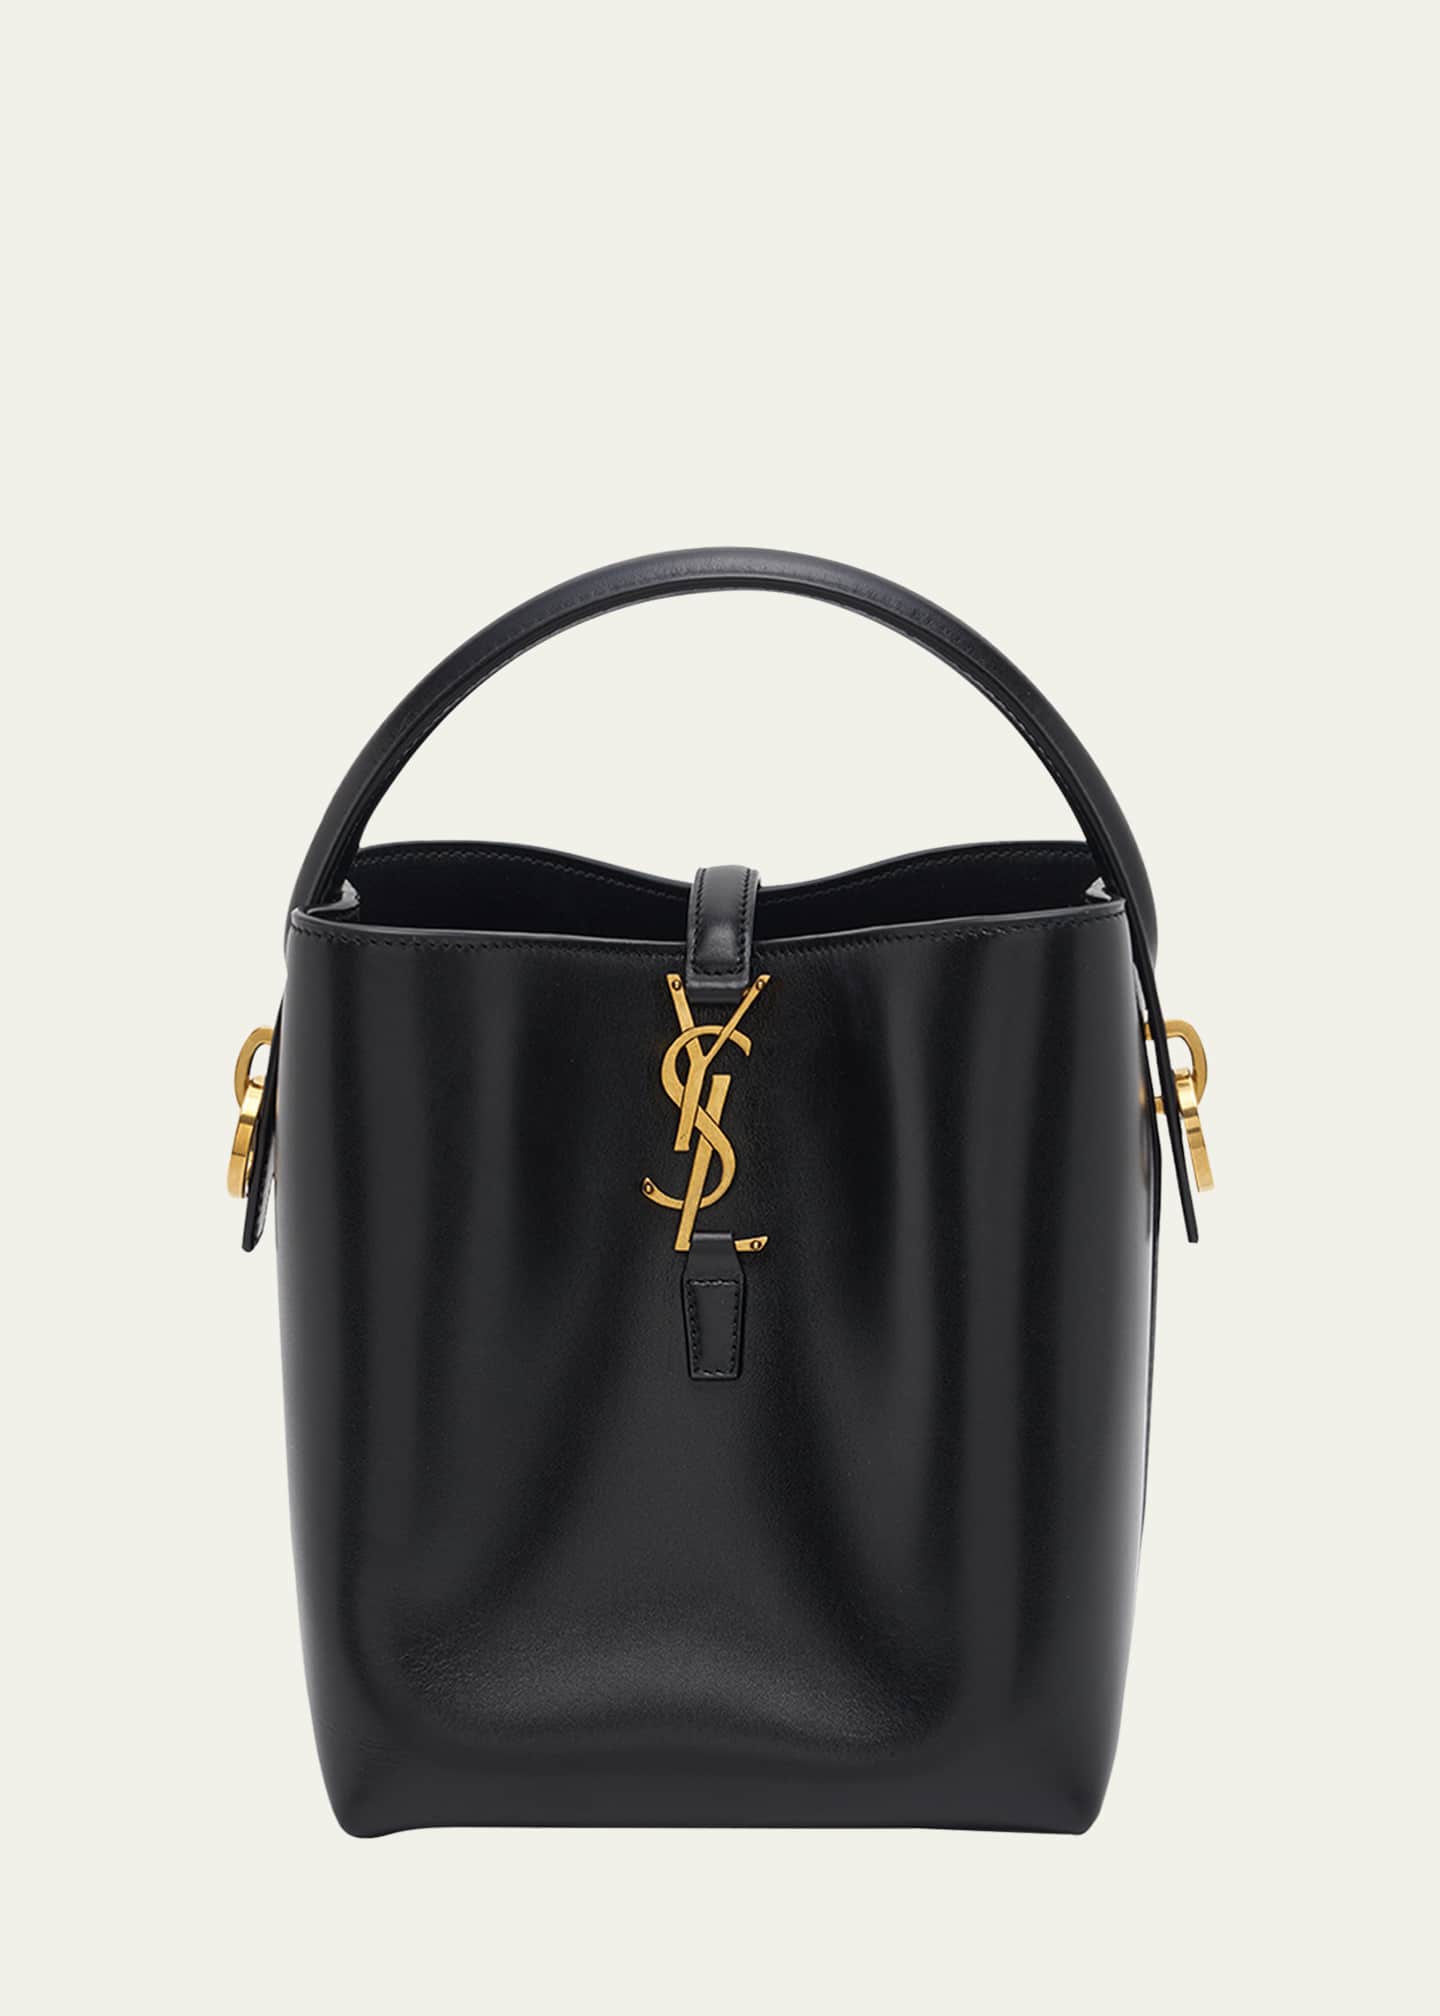 BERGDORF GOODMAN GIFT CARD EVENT - YSL BAGS TO BUY NOW!! 